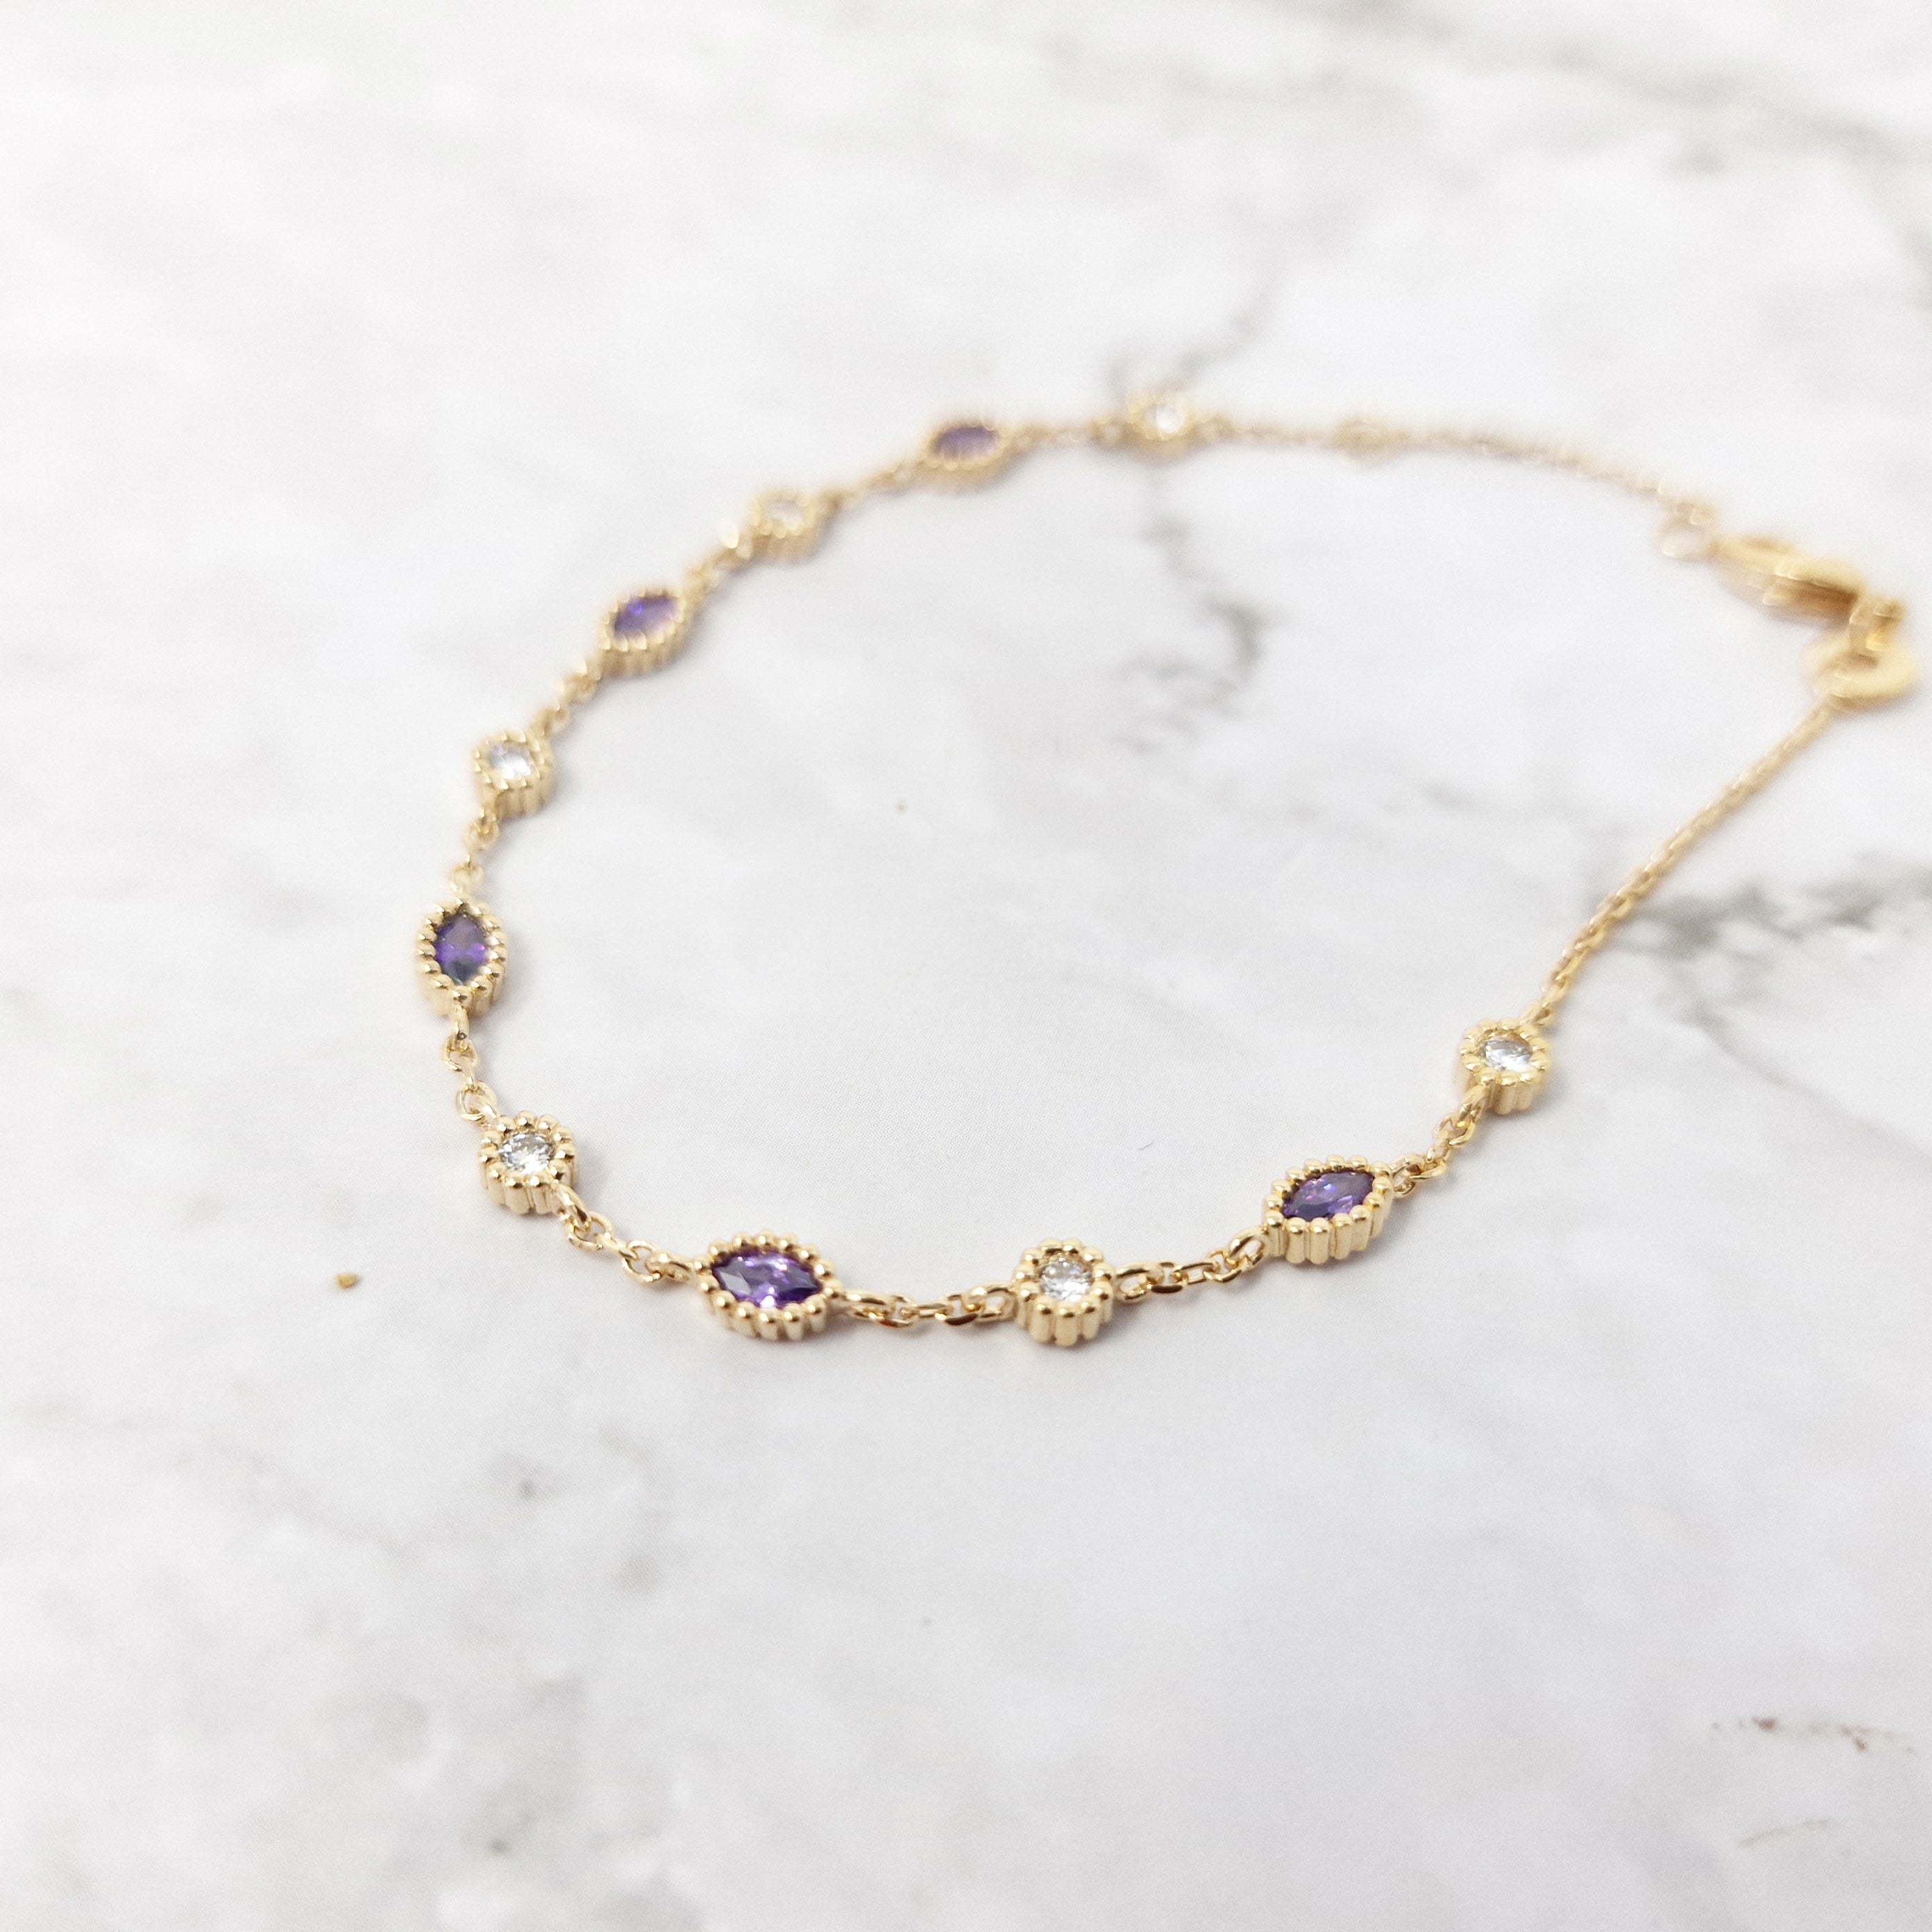 18ct Gold Plated Amethyst And White Topaz Bracelet